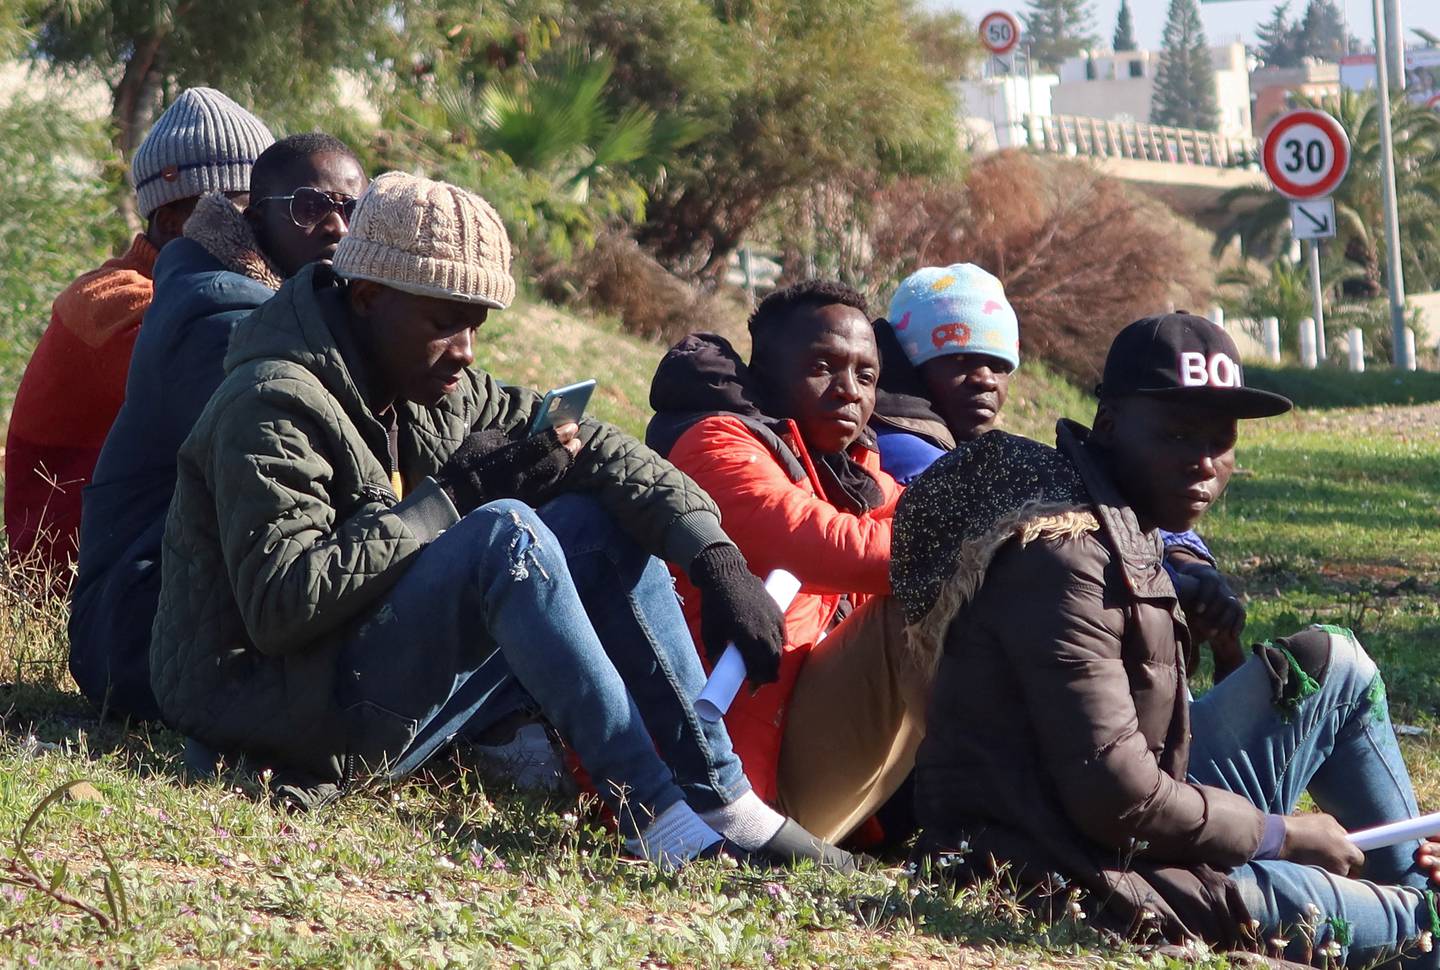 Ivory Coast citizens living in Tunisia wait near their country's embassy in Tunis as they seek repatriation. Reuters